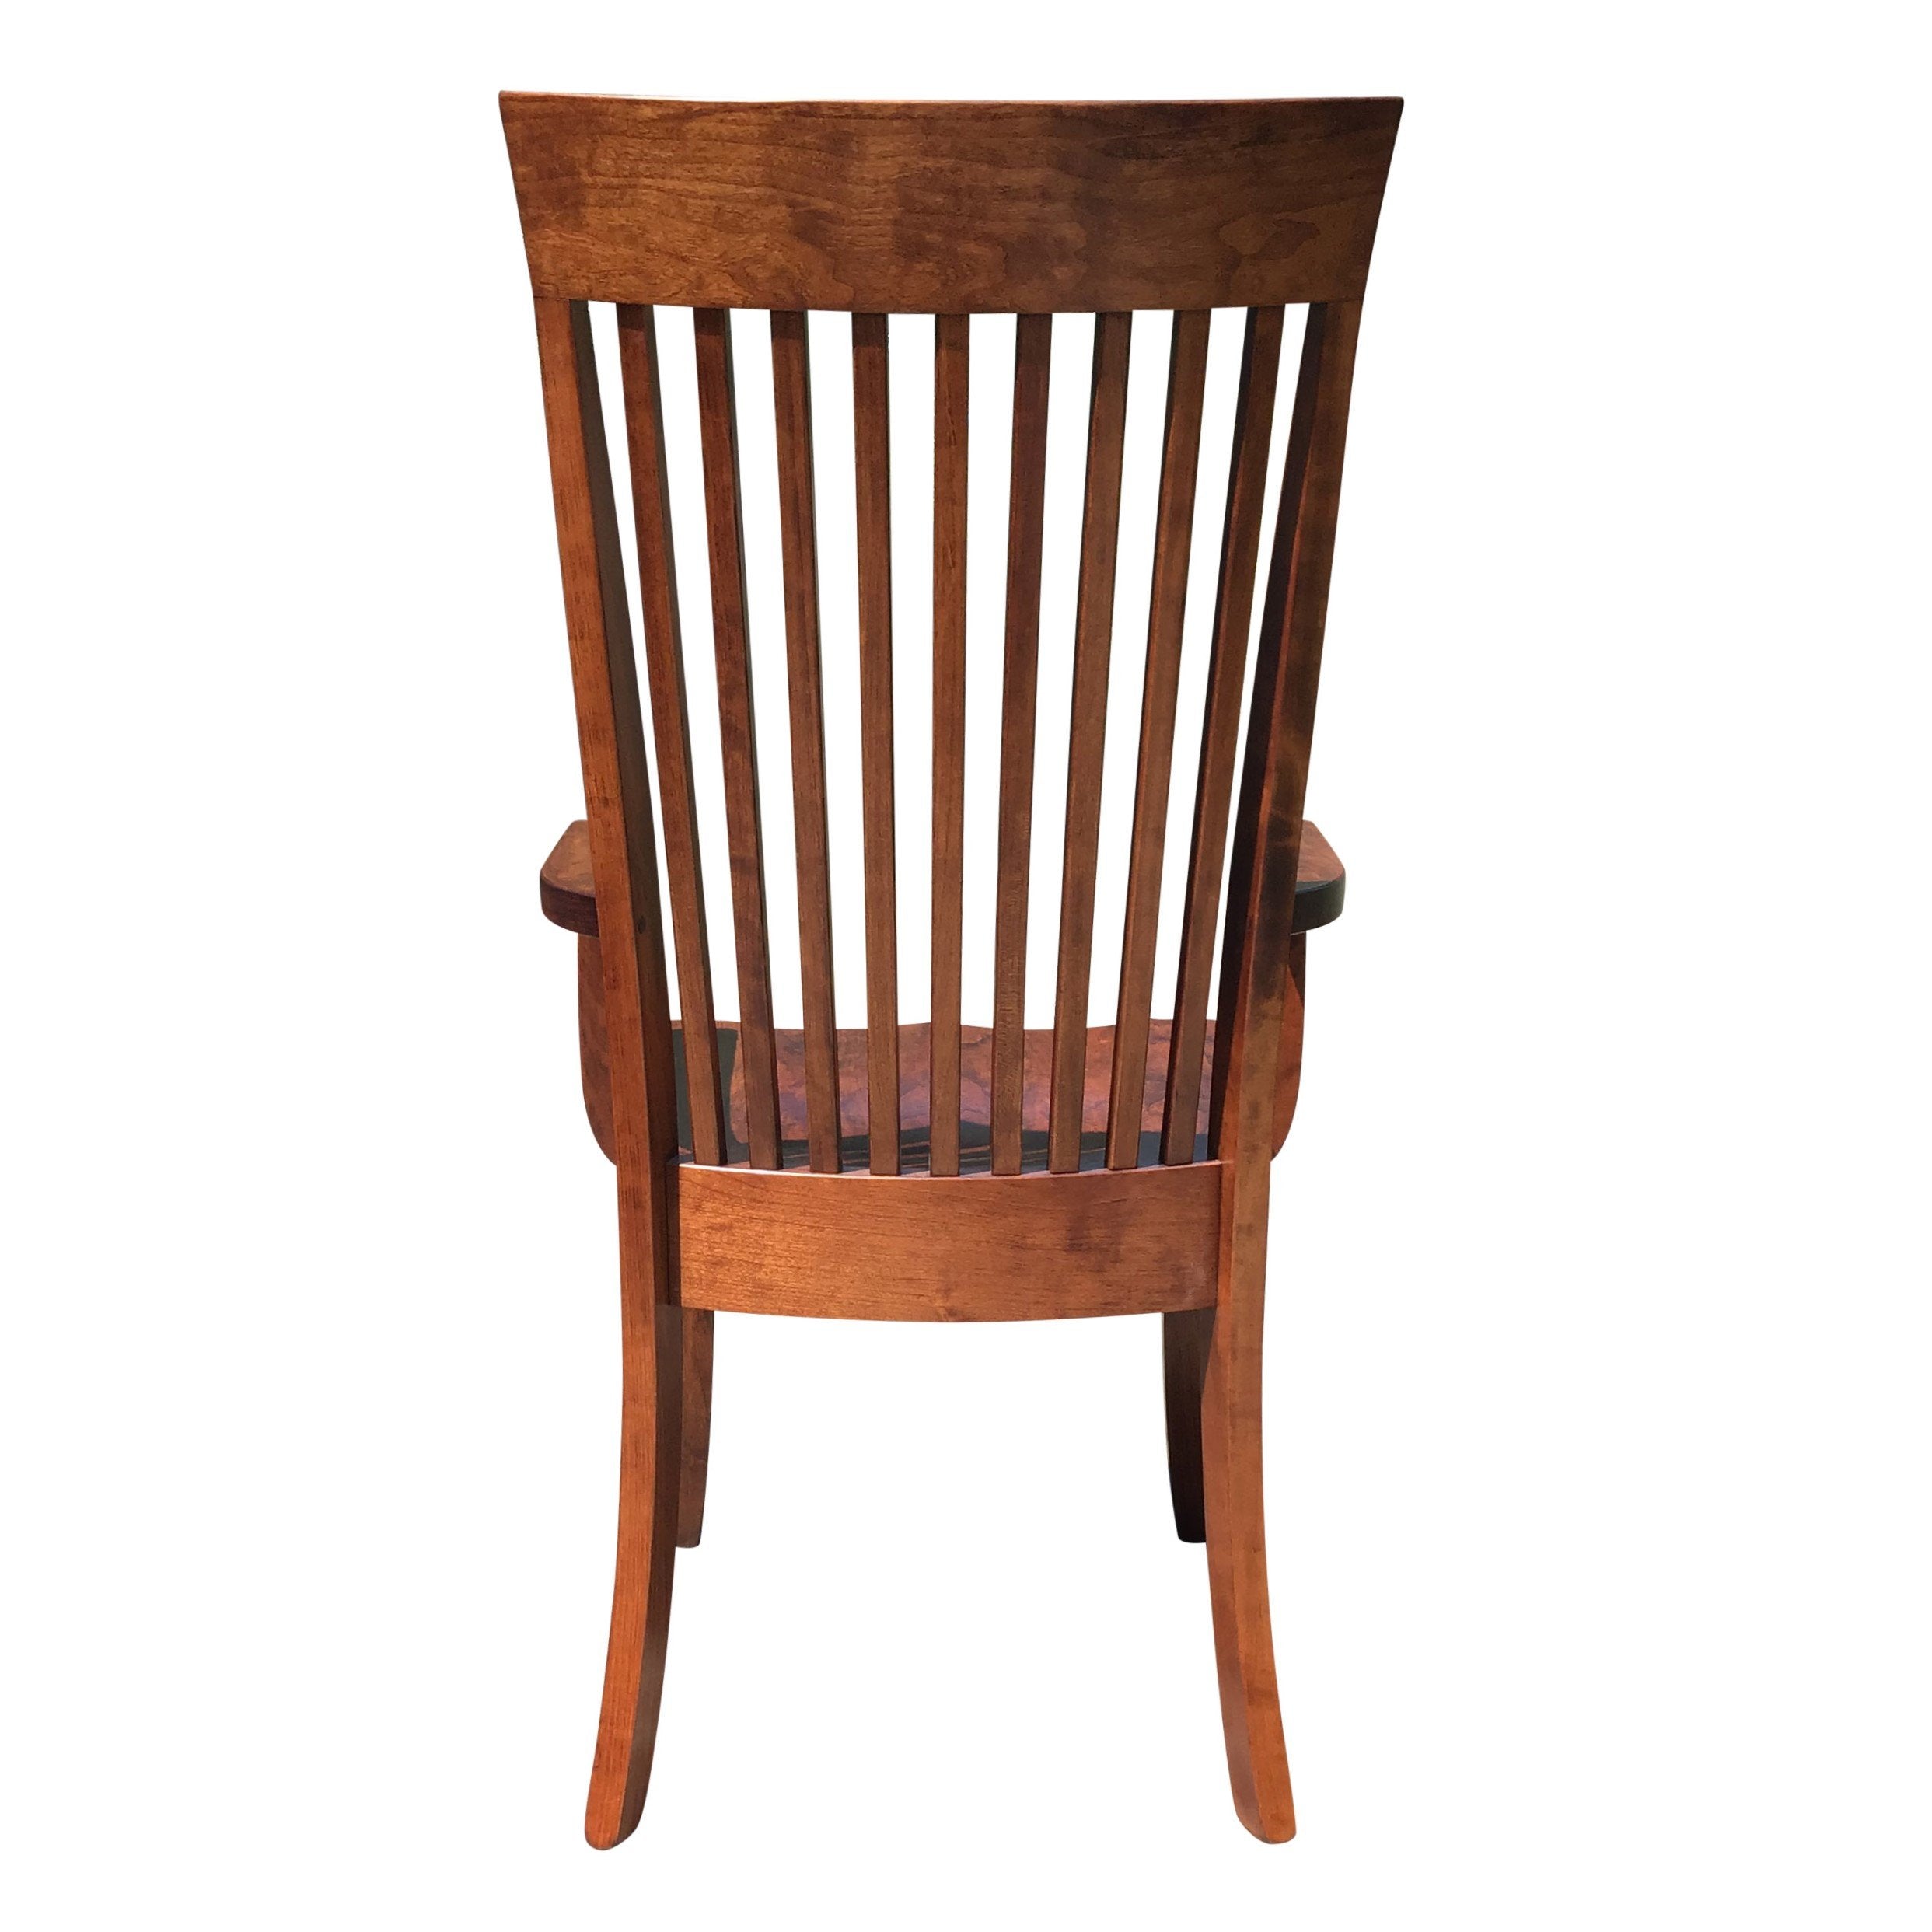 Amish Old World Shaker Chair